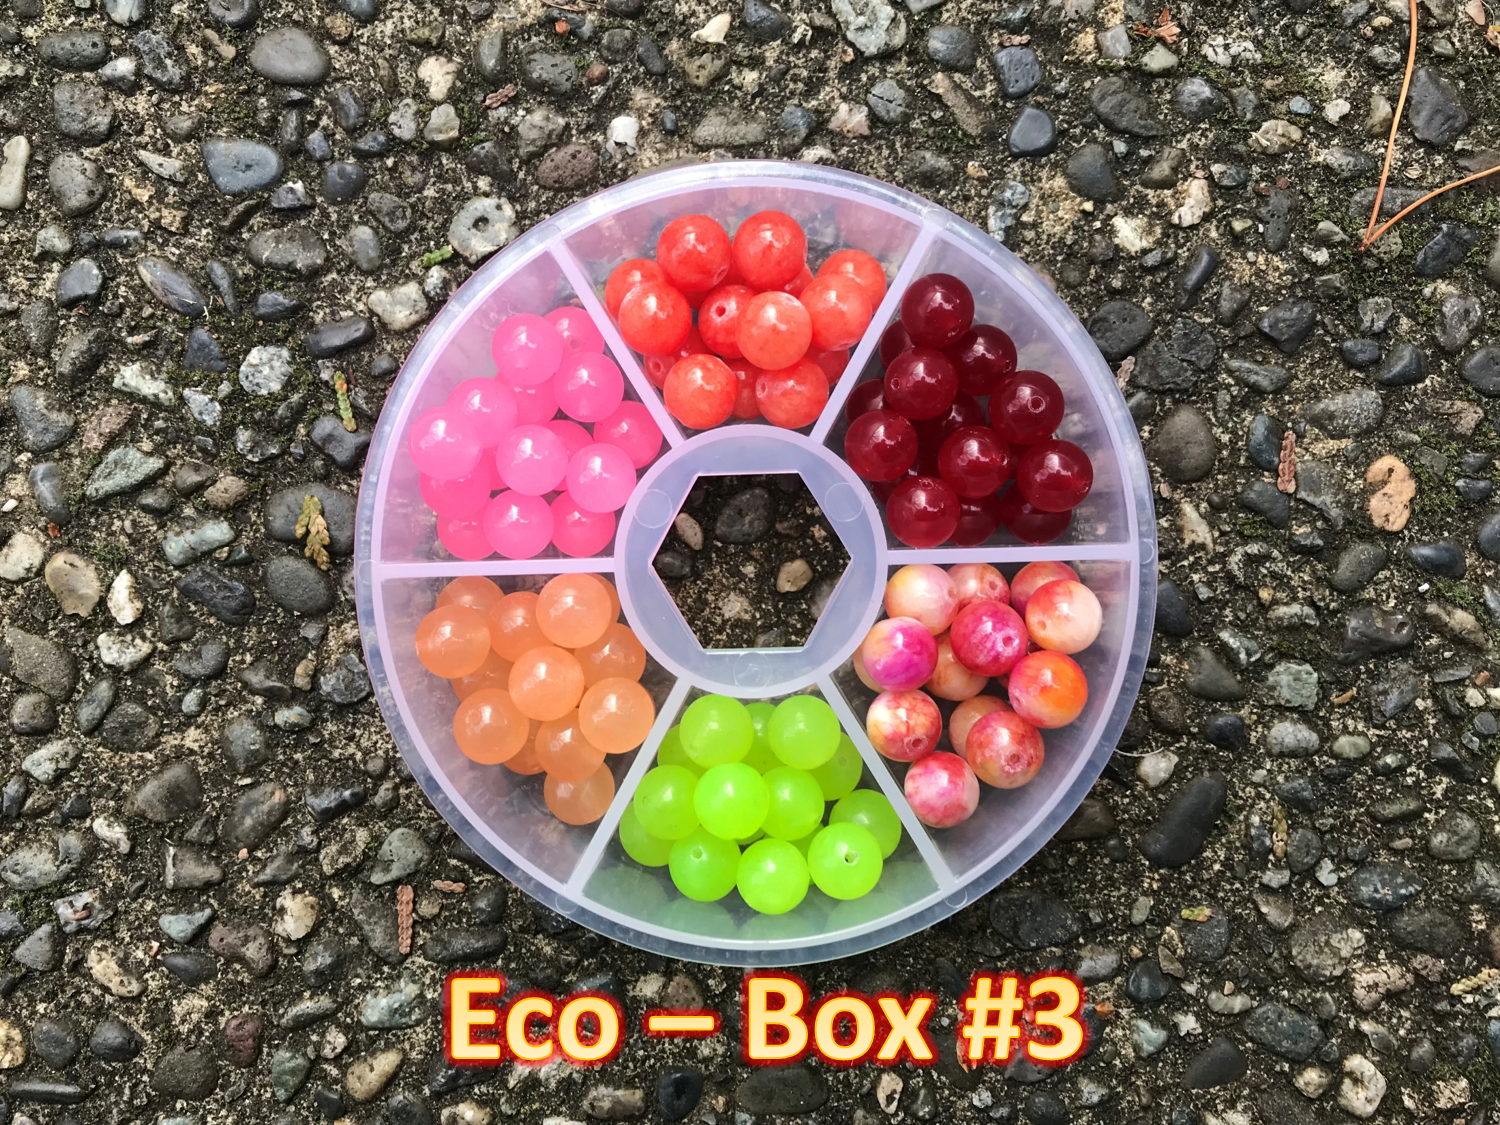 6 Color - 180 Count - 6mm Fishing Bead Wheel Combo Packs - Stone